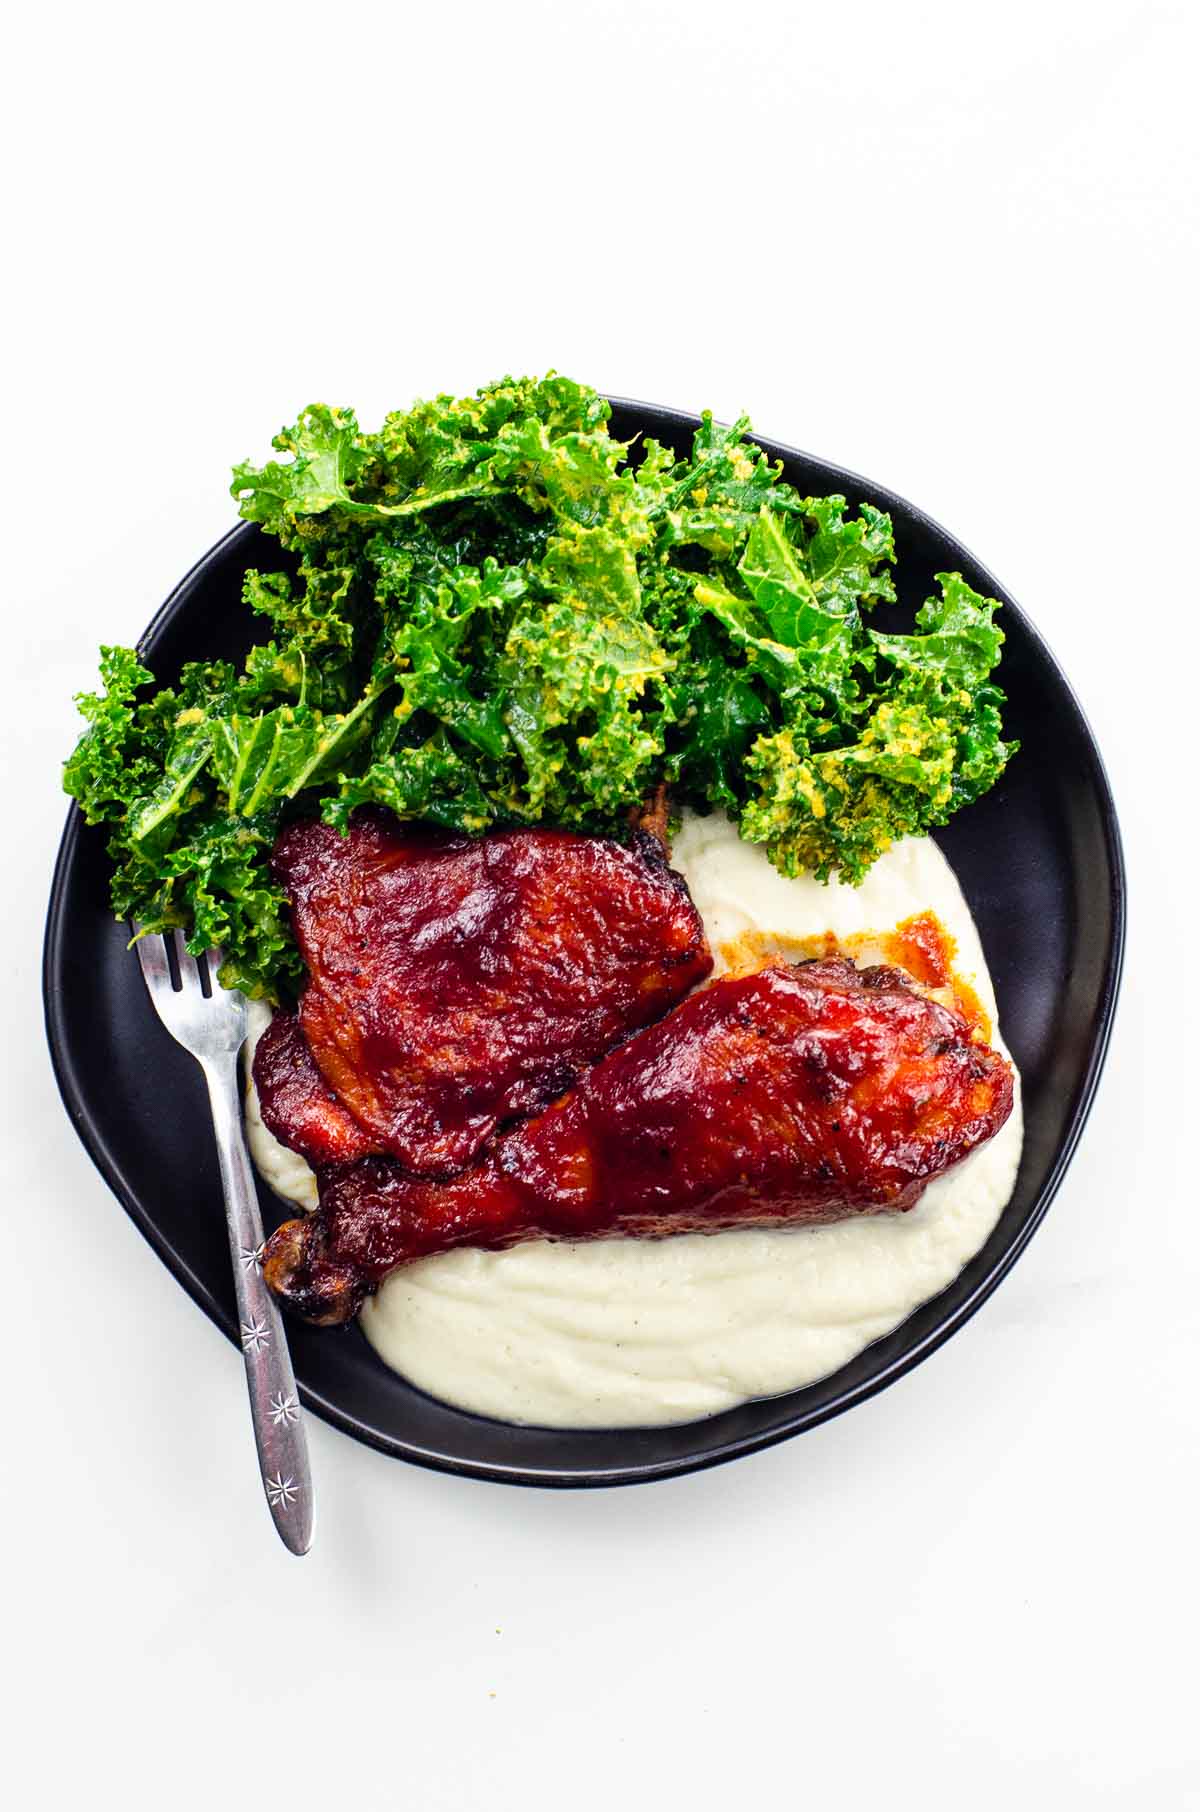 Baked BBQ Chicken Thighs and Legs on a plate with salad and cauliflower puree